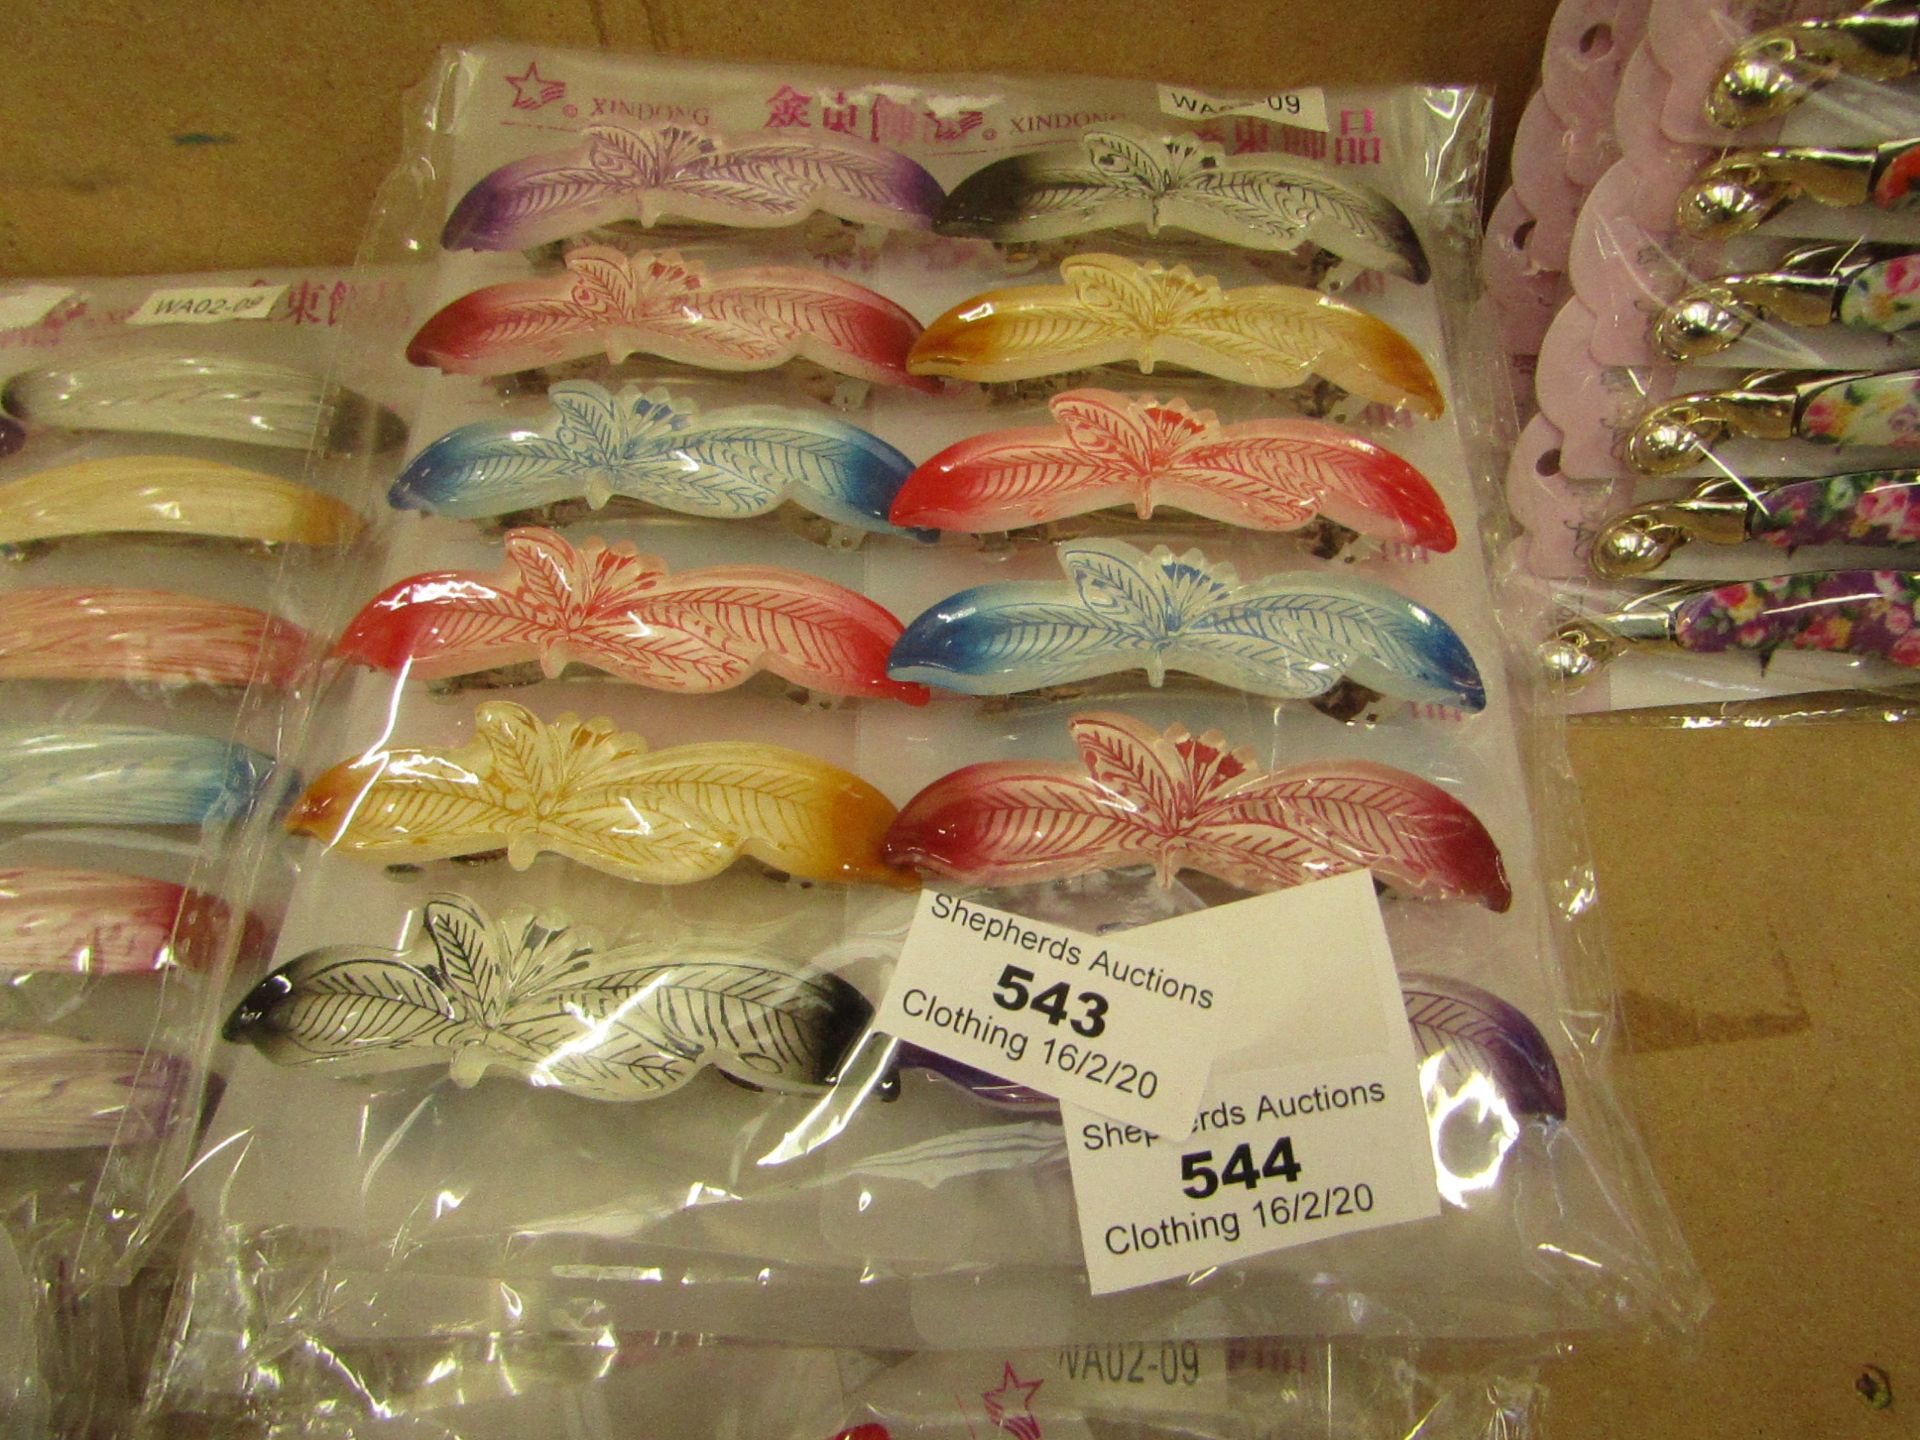 2 x packs of 12 per pack Decorative Hair Clips, RRP £1.99 each new & packaged